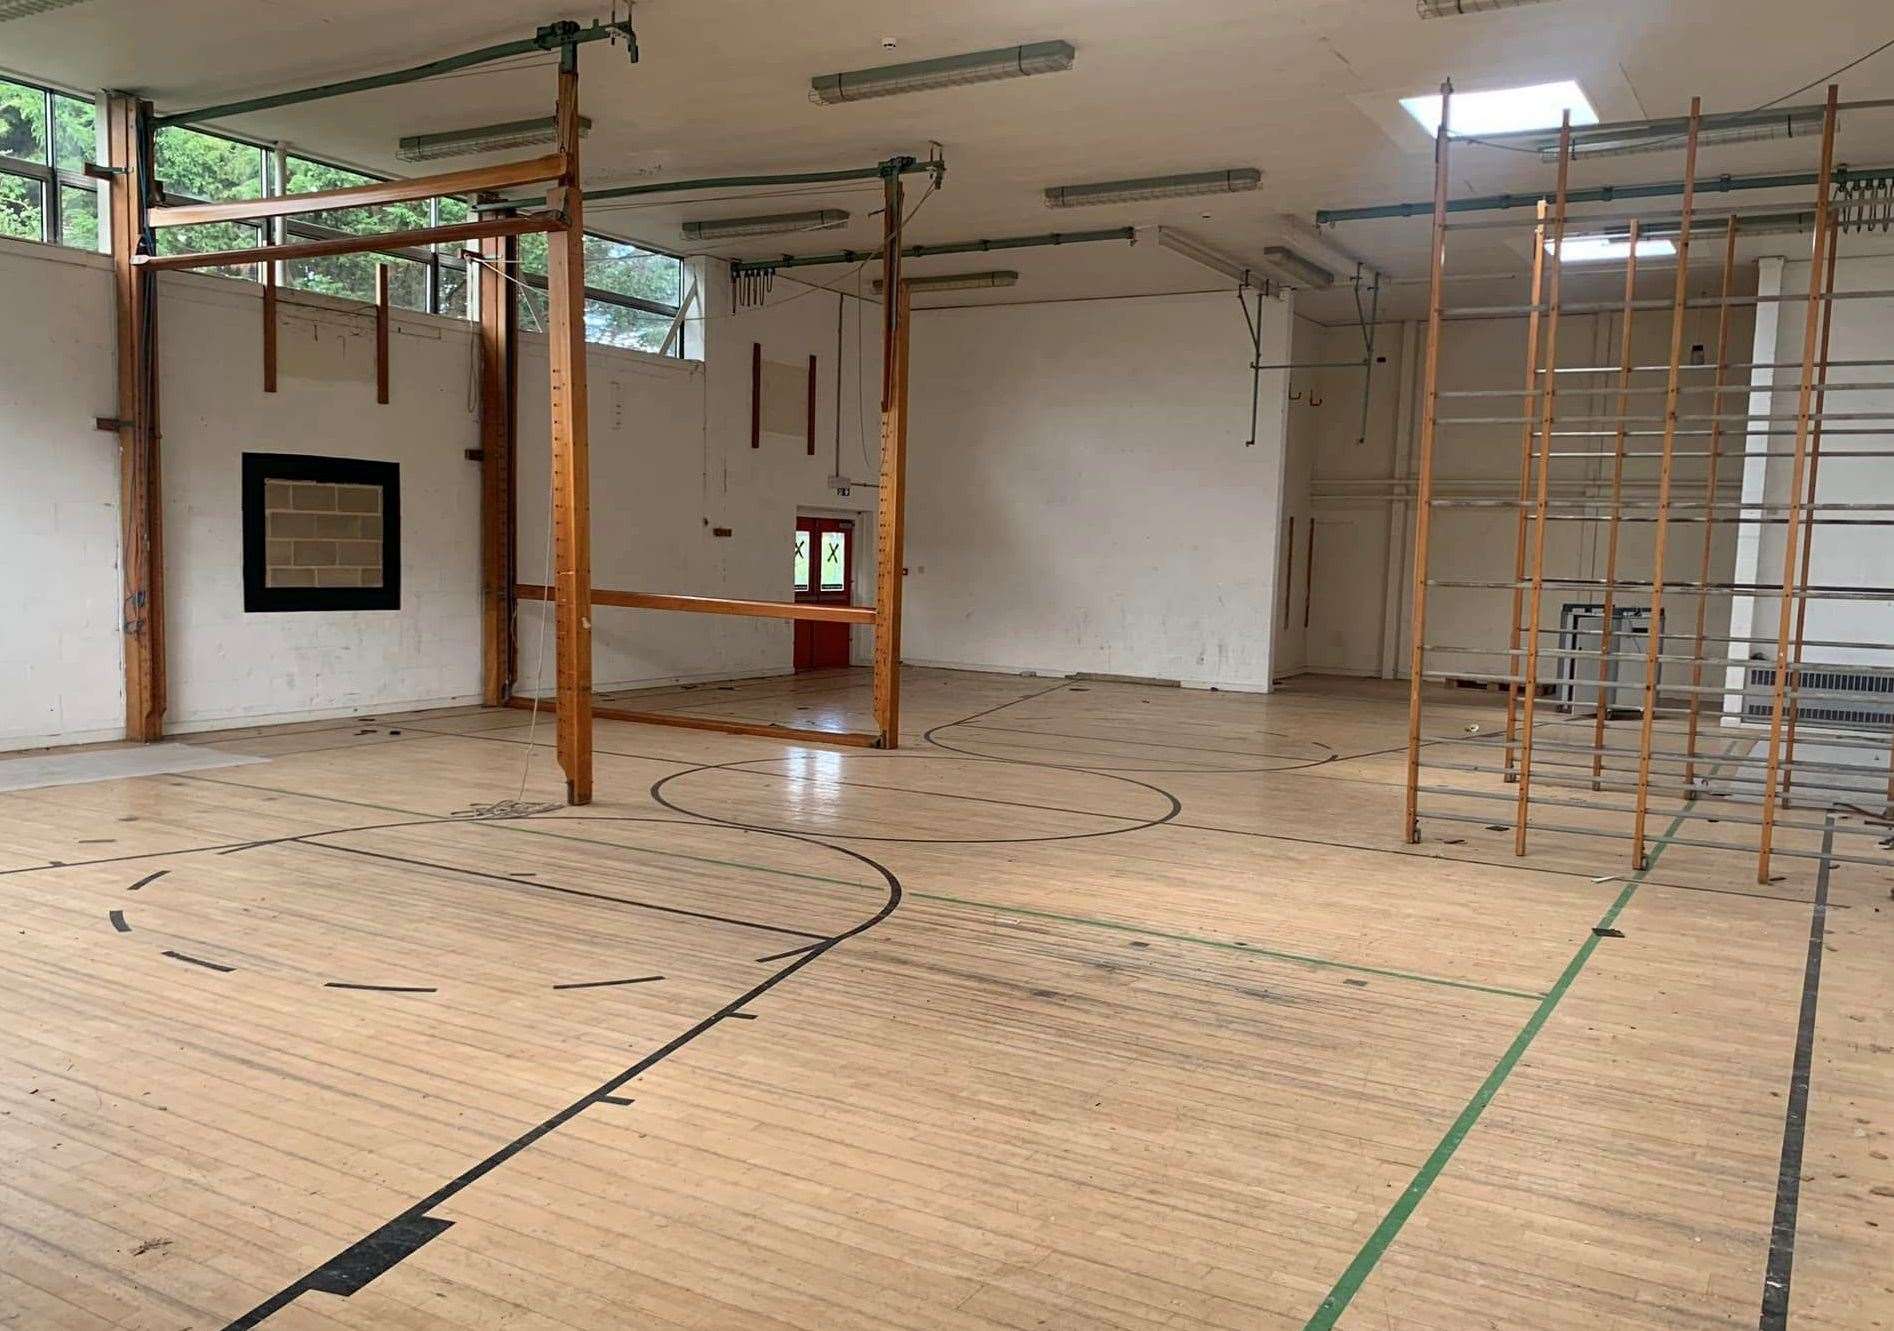 The sports gym at the school in Hextable